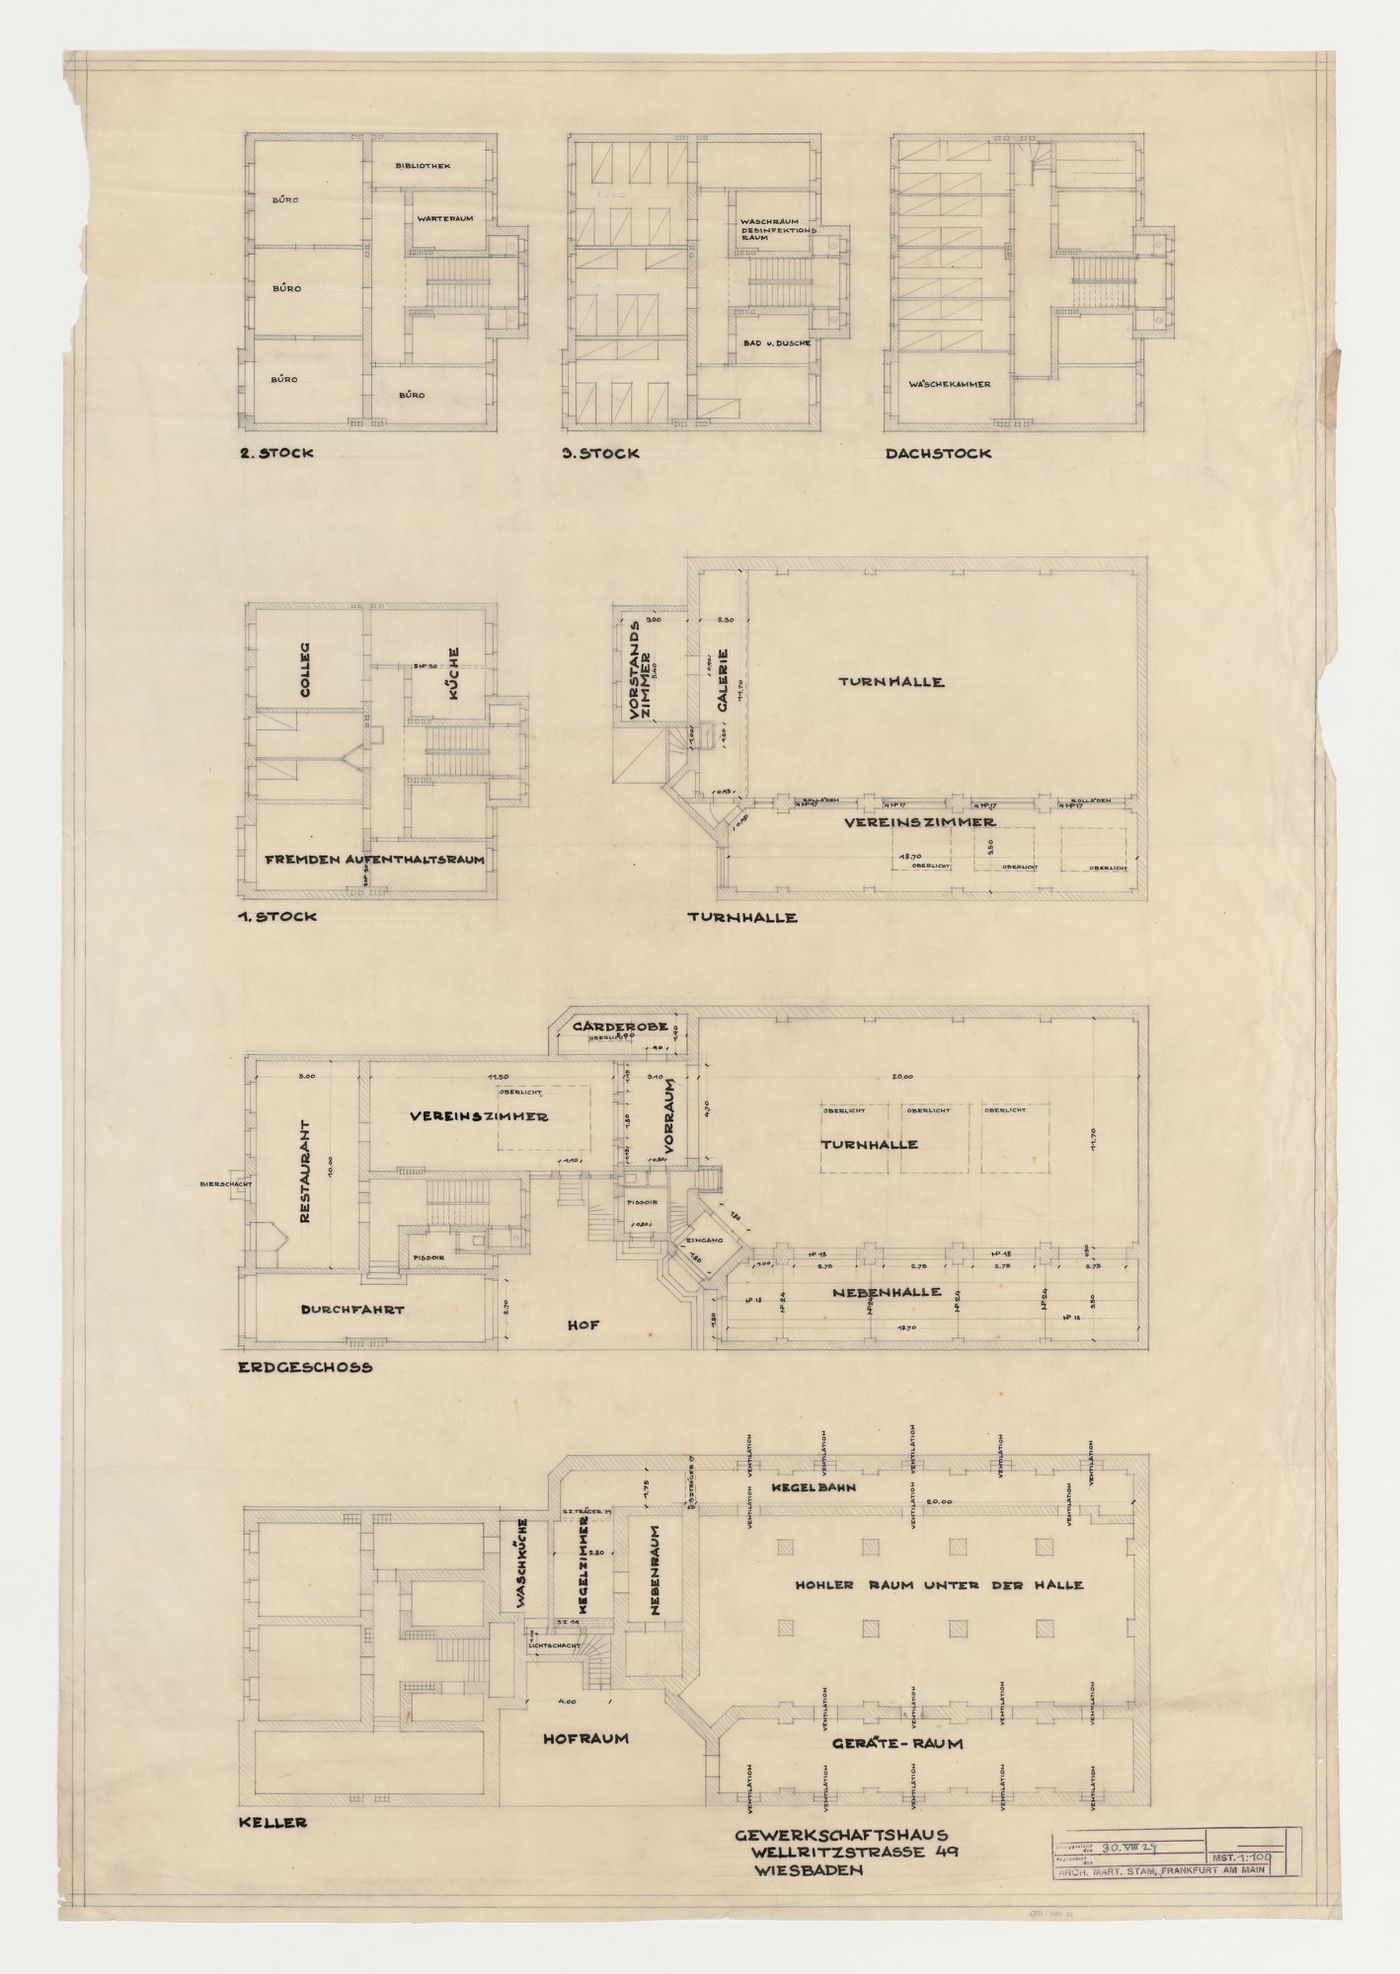 Plans, possibly for alterations and additions for a trade union corporate headquarters, Wiesbaden, Germany